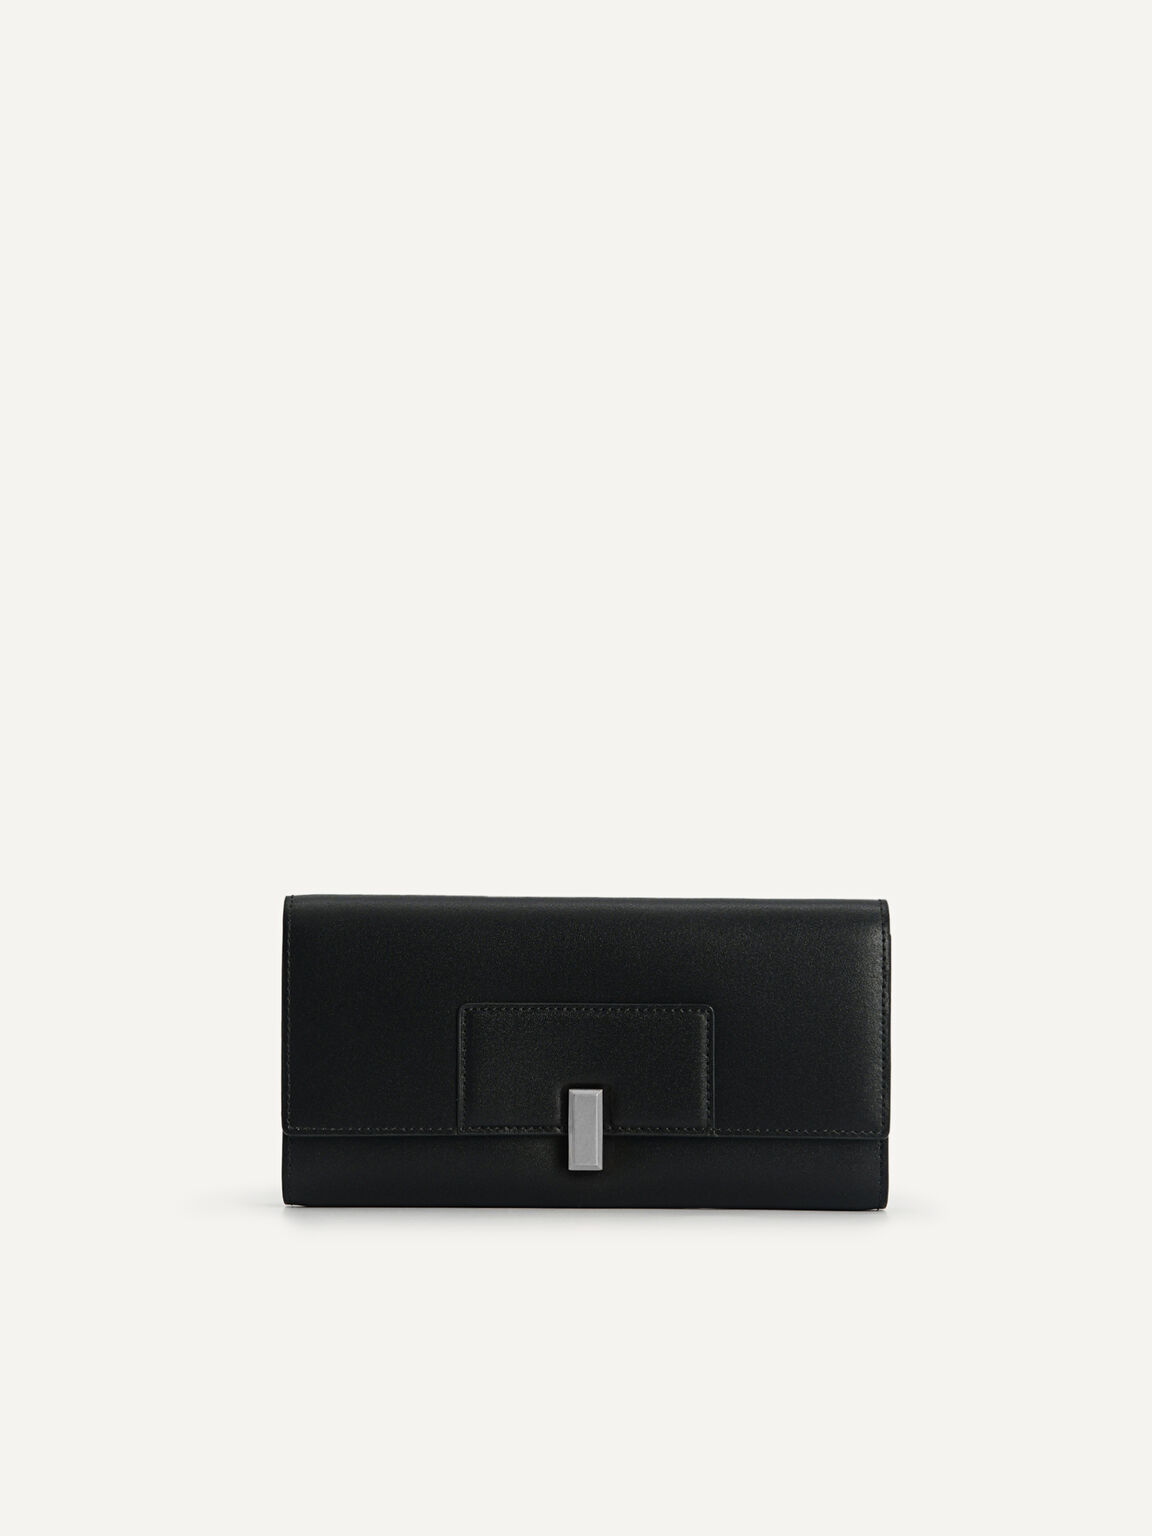 Monochrome Long Leather Wallet with Chain, Black, hi-res